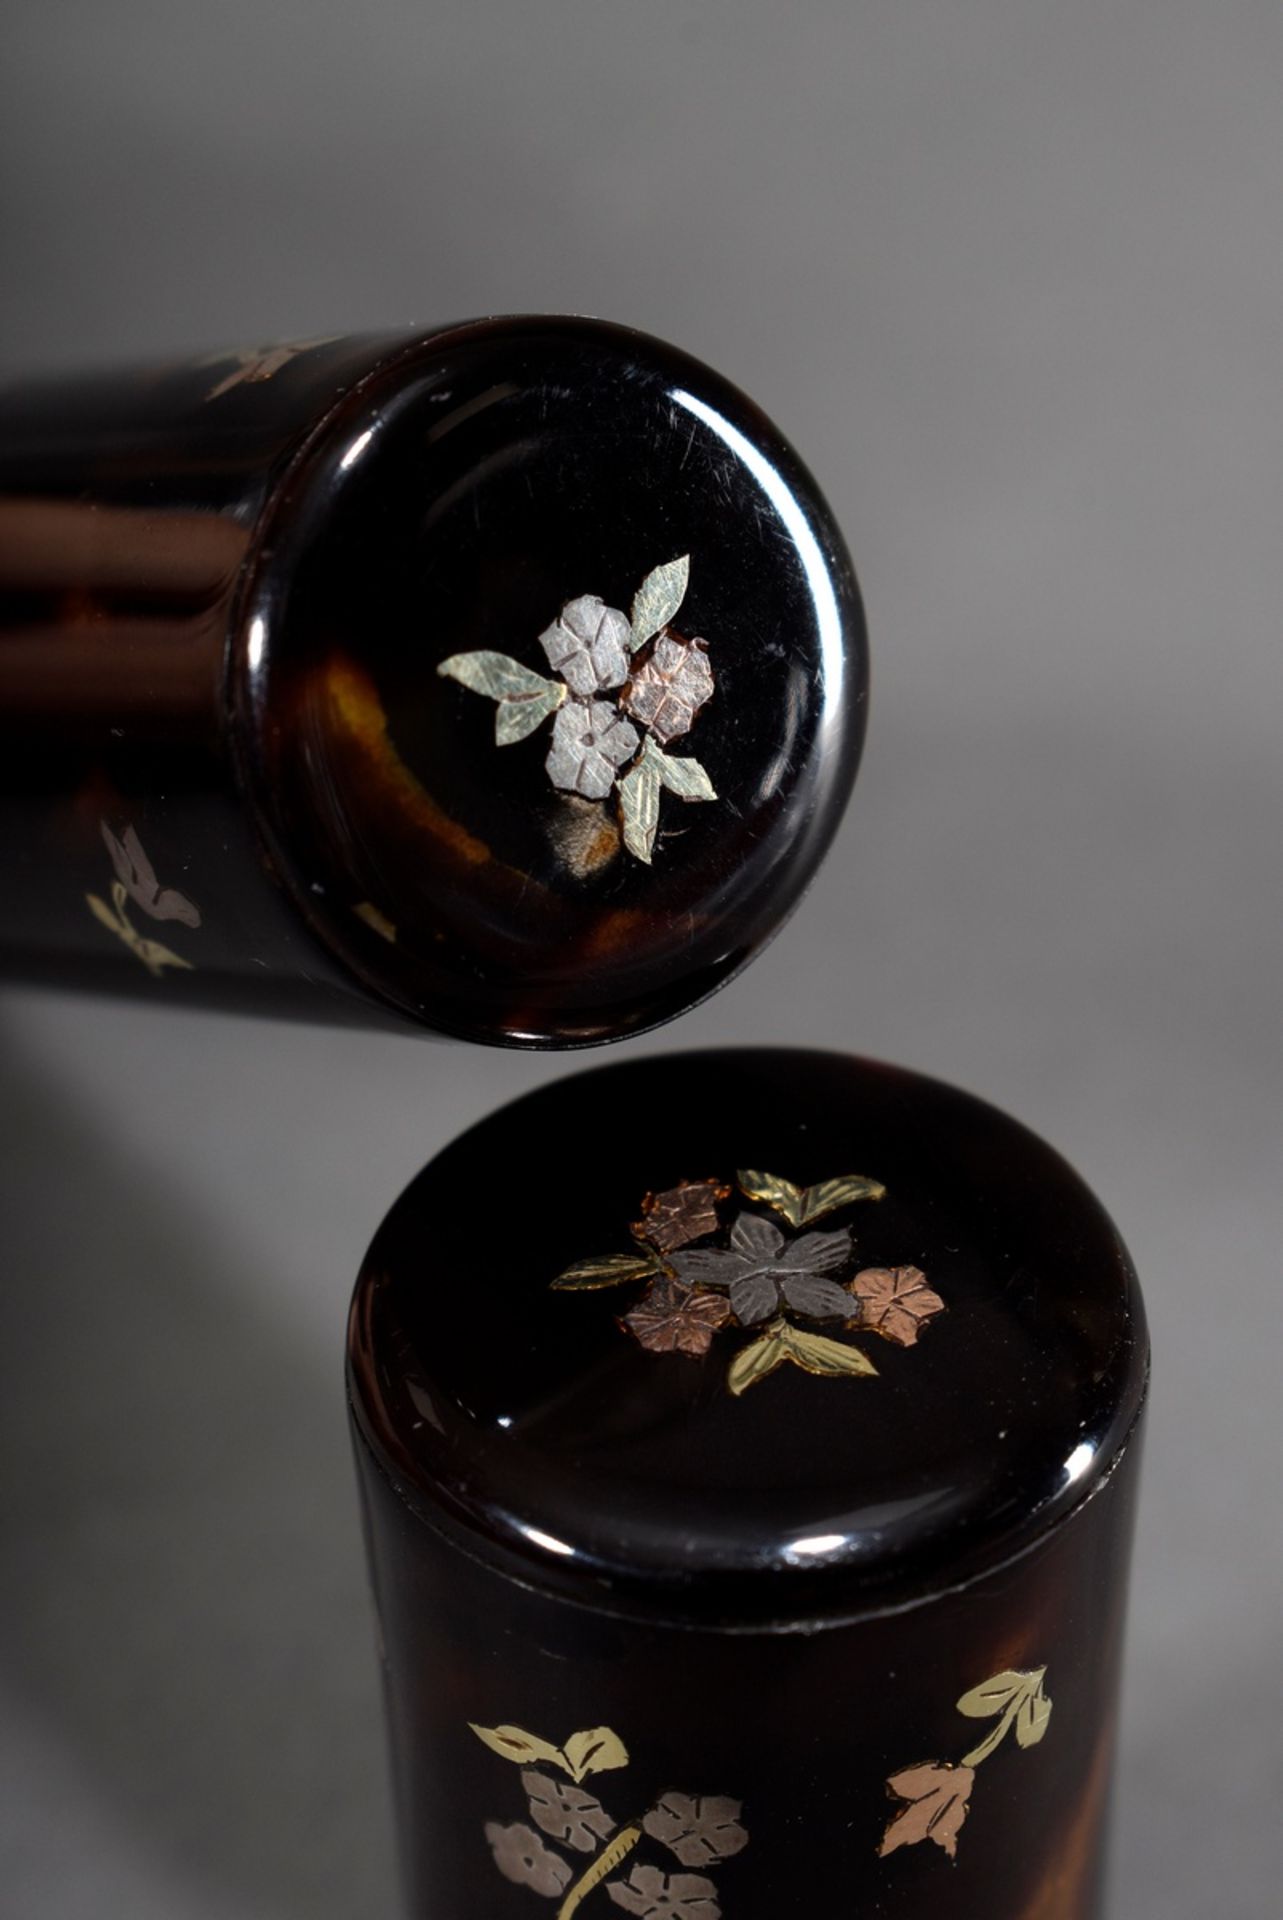 Slender cylindrical tortoiseshell needle case with RG/GG and silver piqué-posé inlays "flower tendr - Image 4 of 4